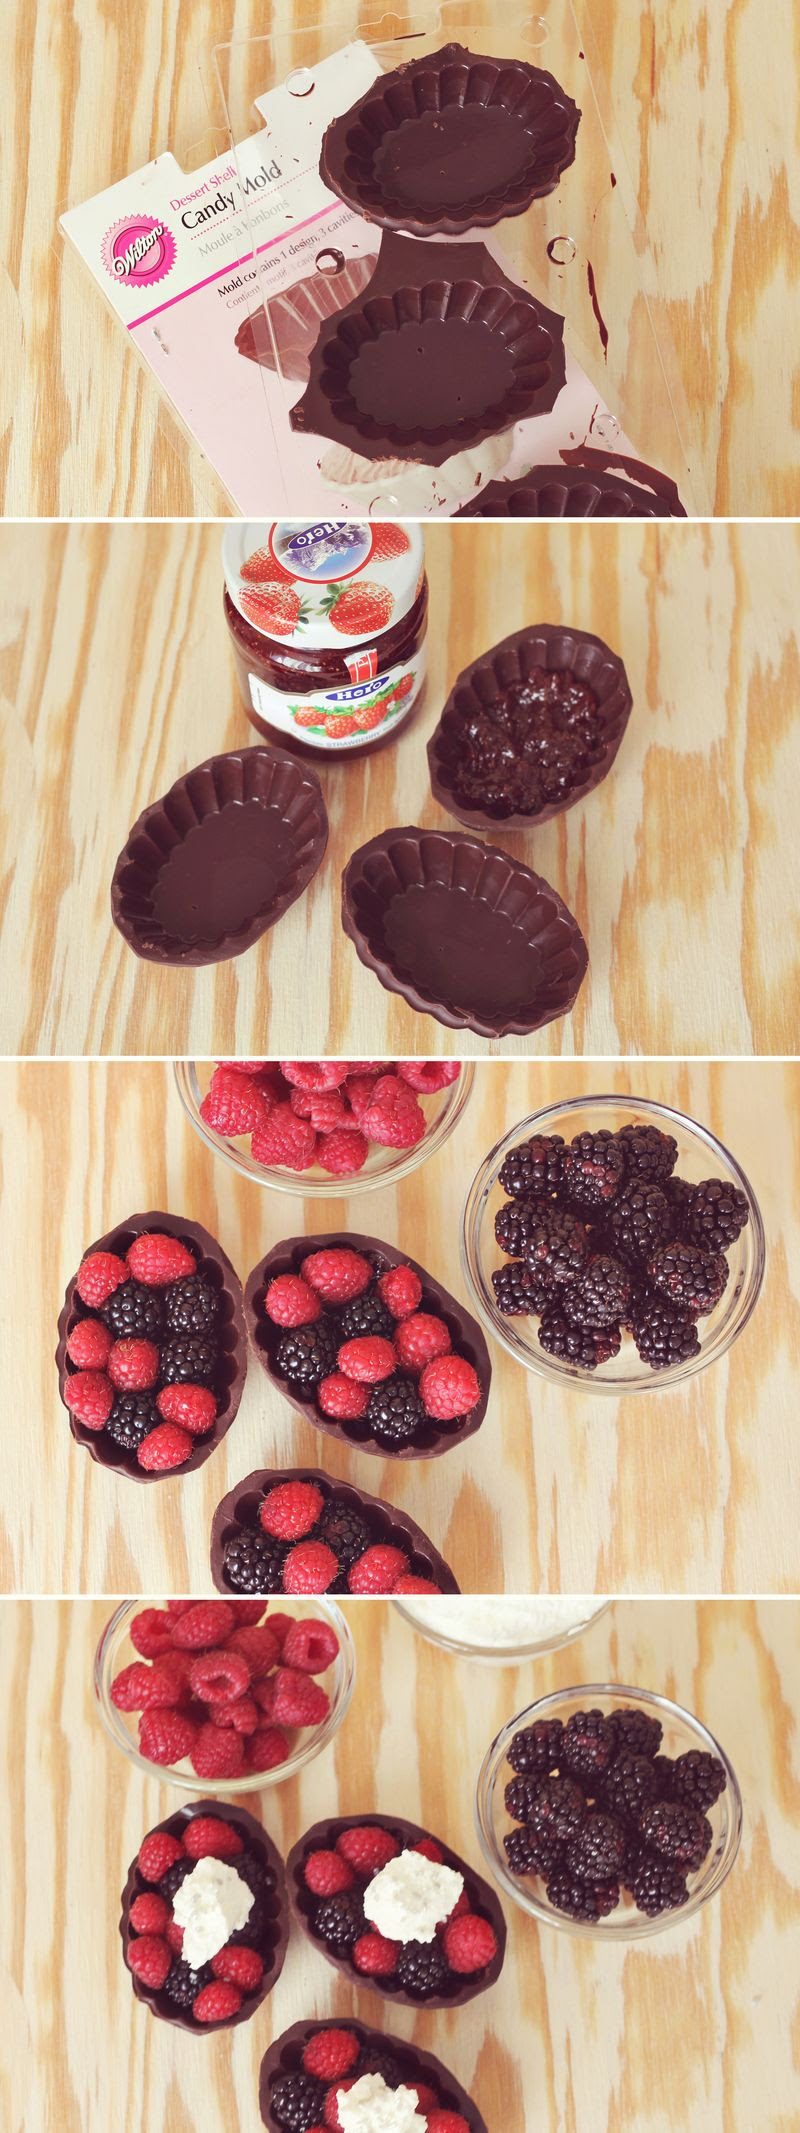 Tips for using chocolate molds